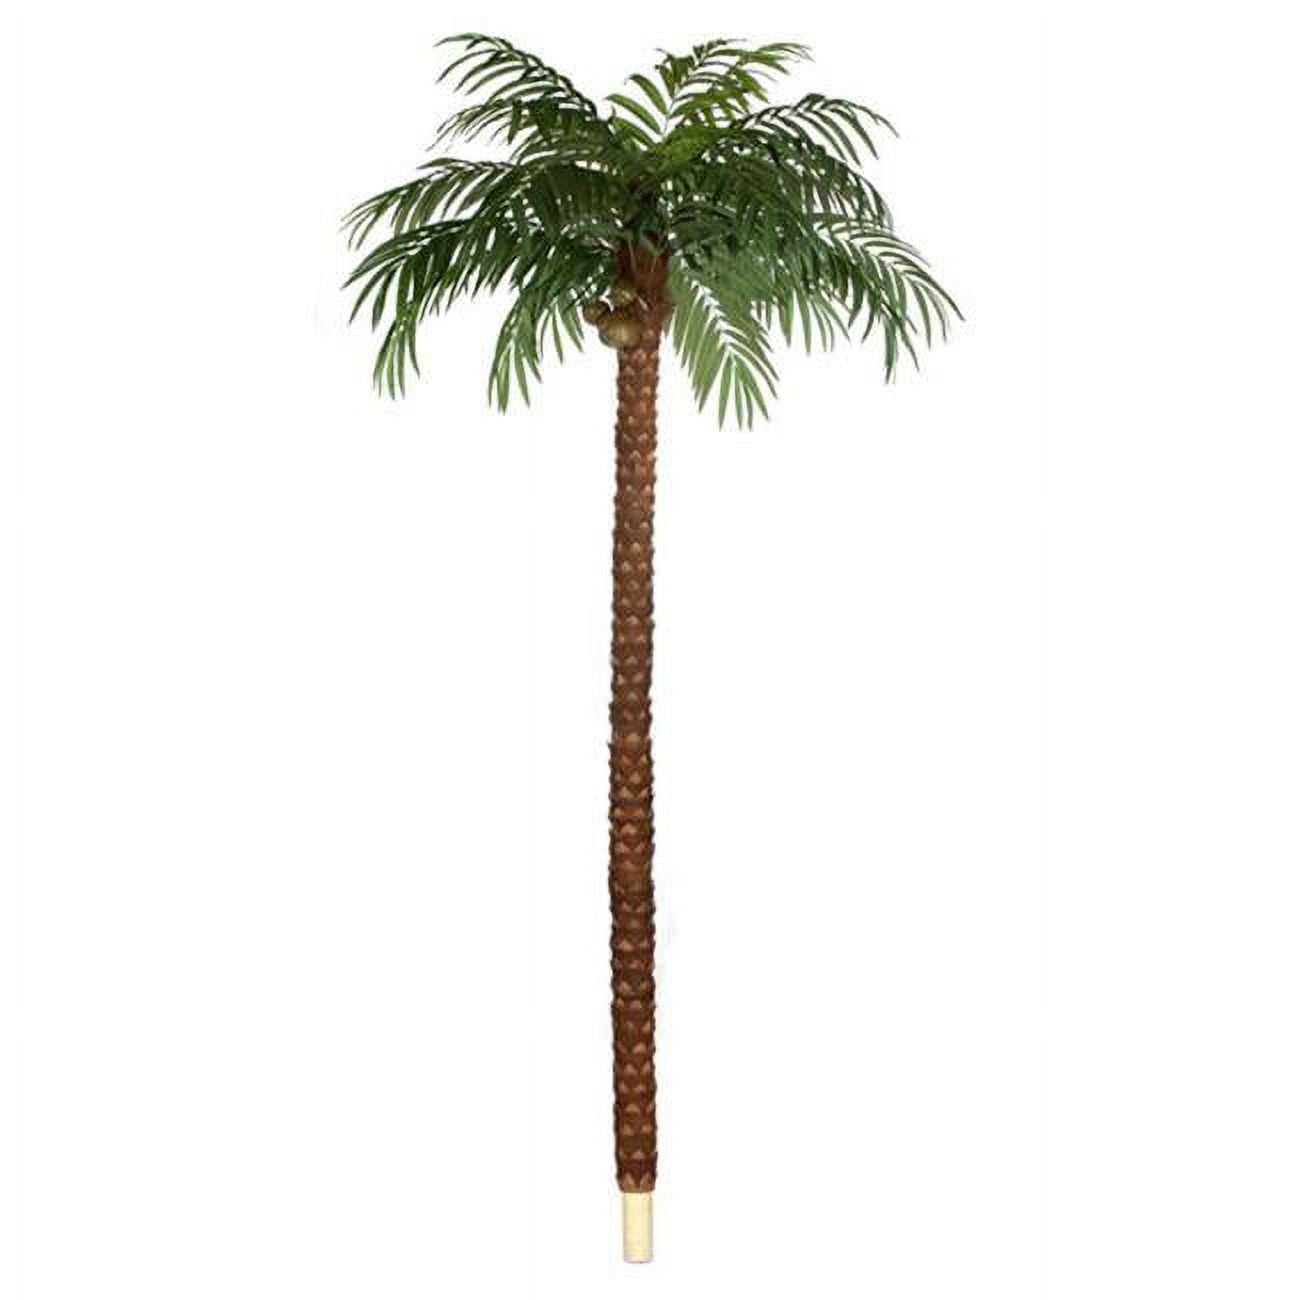 P-150630 15 Ft. Coconut Palm Tree - Green